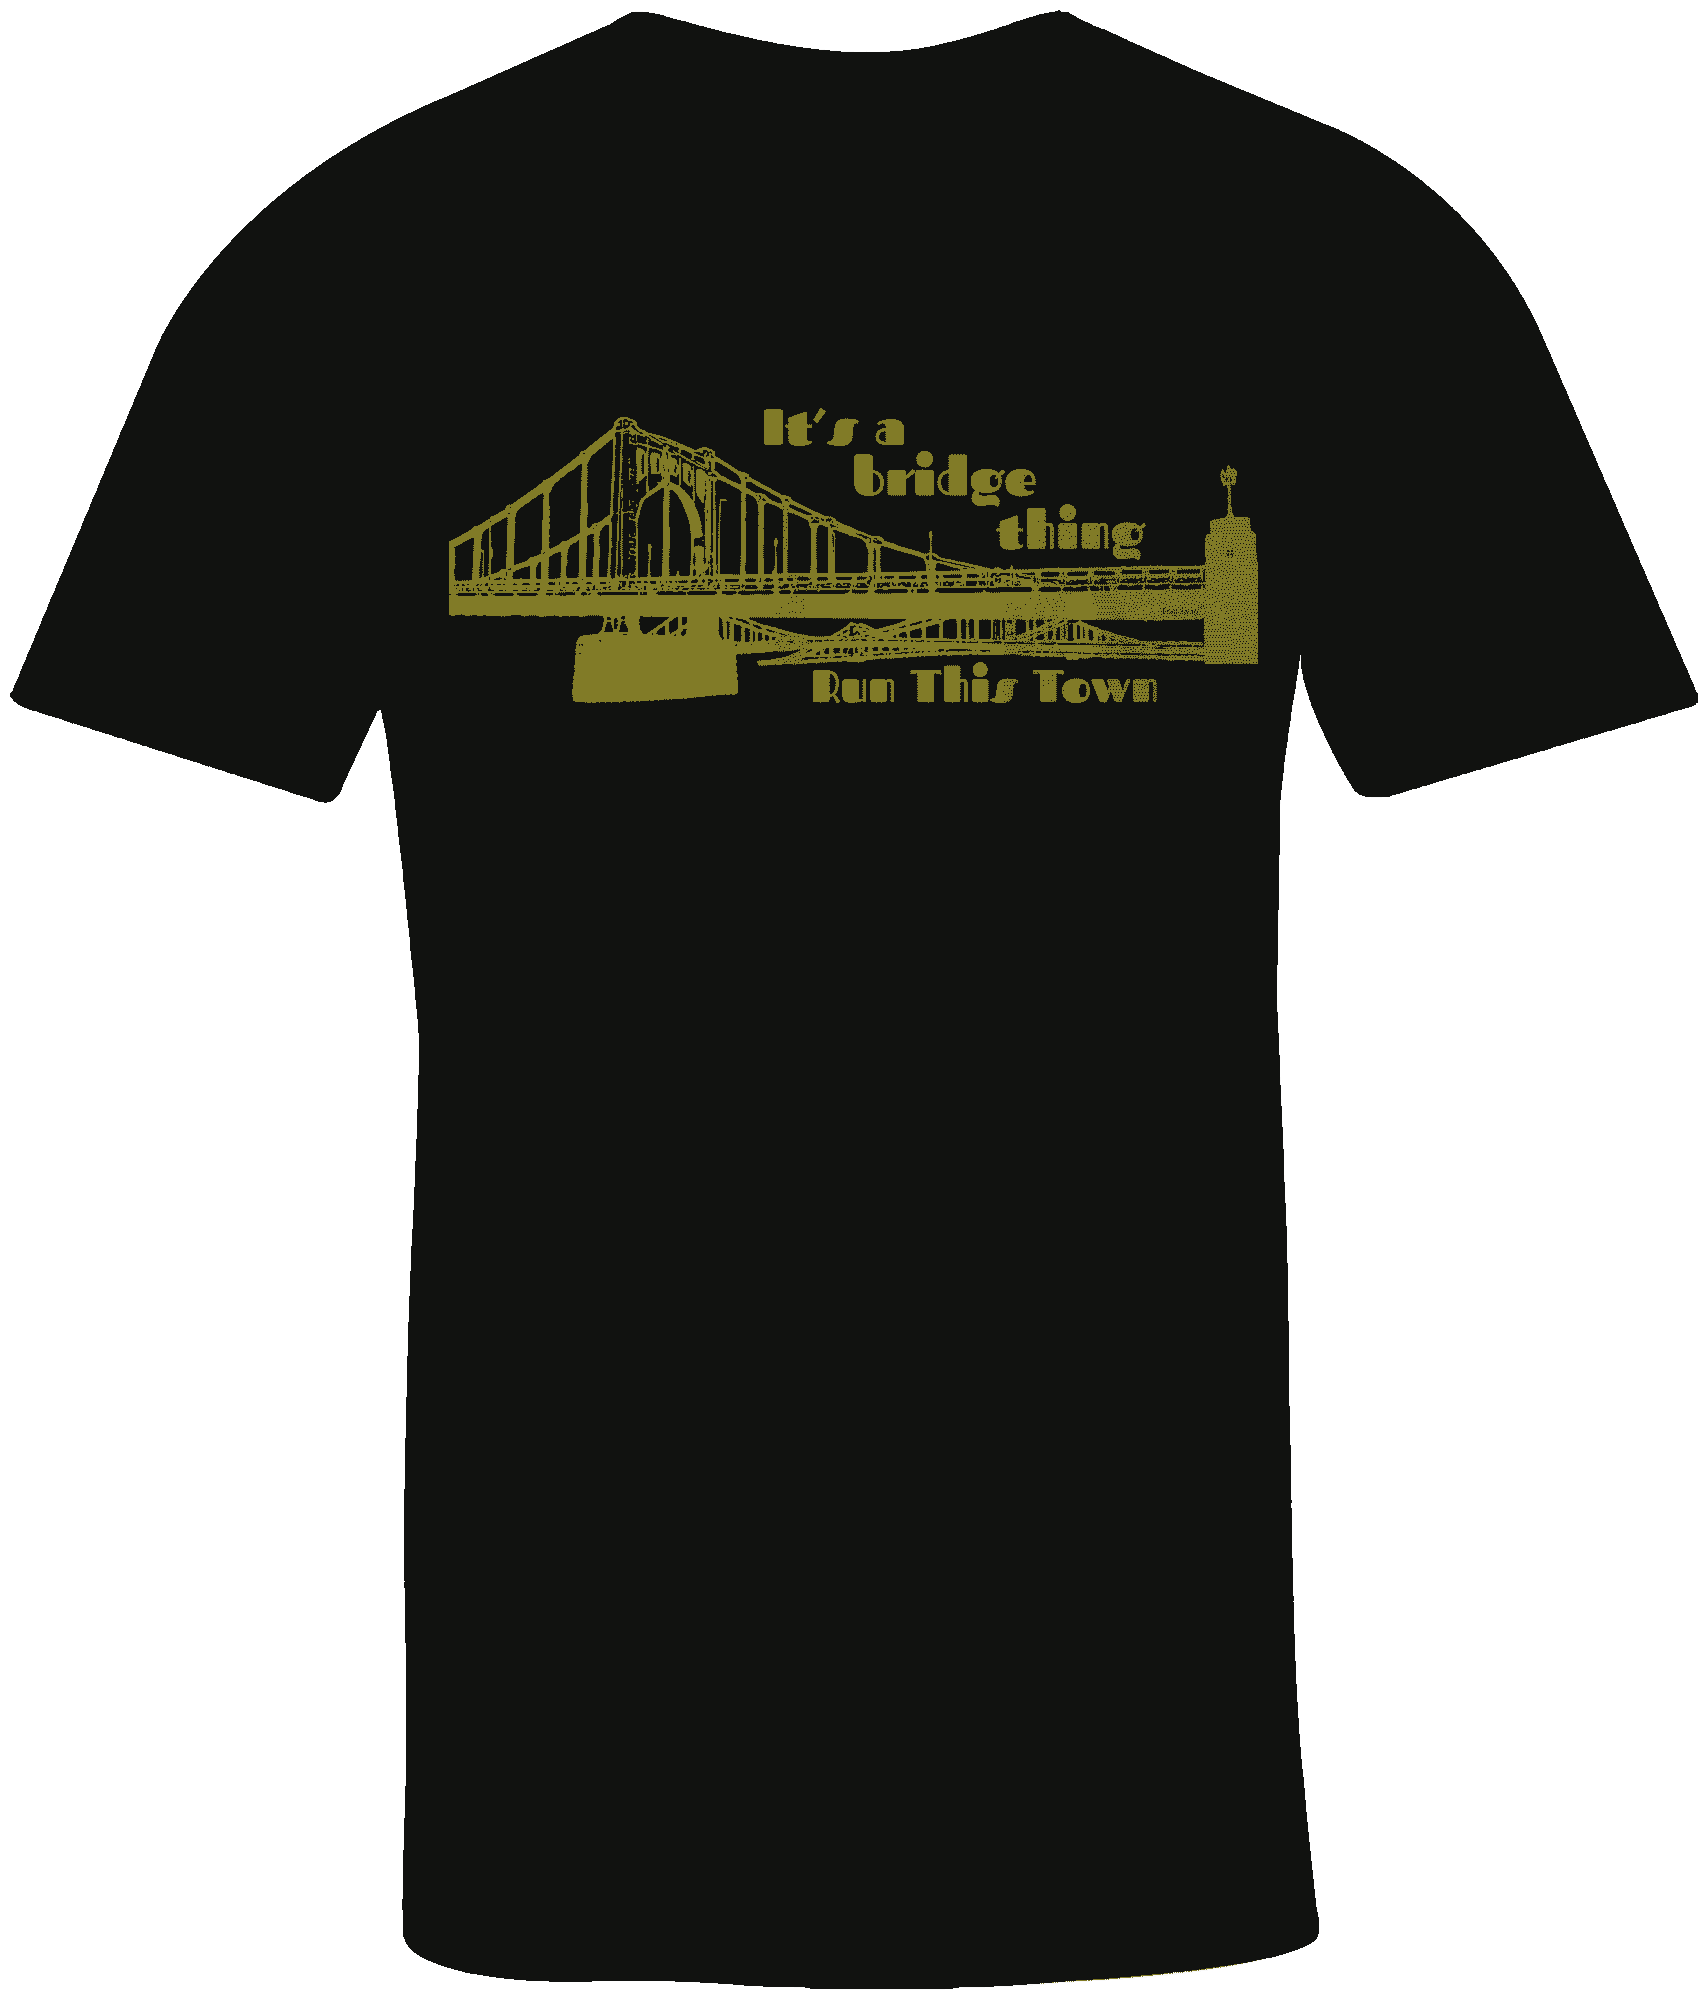 Unisex black crew neck t-shirt with gold distressed graphic image of a bridge text it's a bridge thing above the bridge, text run this town below the bridge 